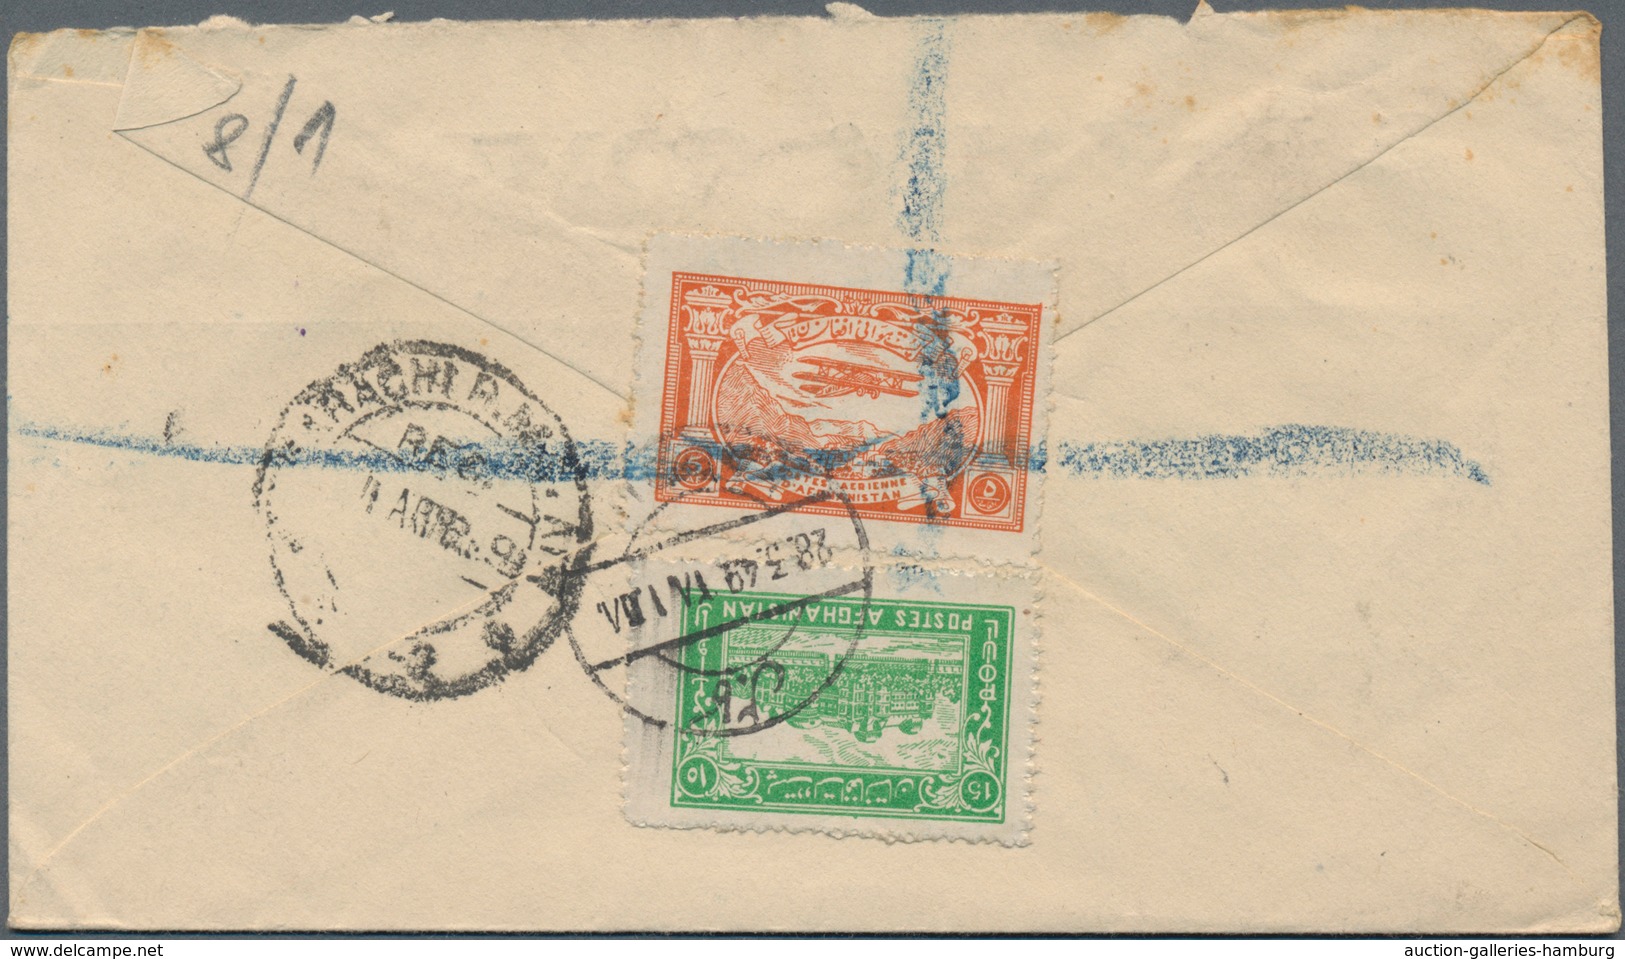 Afghanistan: 1928/1968, about 120 covers including a great deal of registered airmail with emphasis